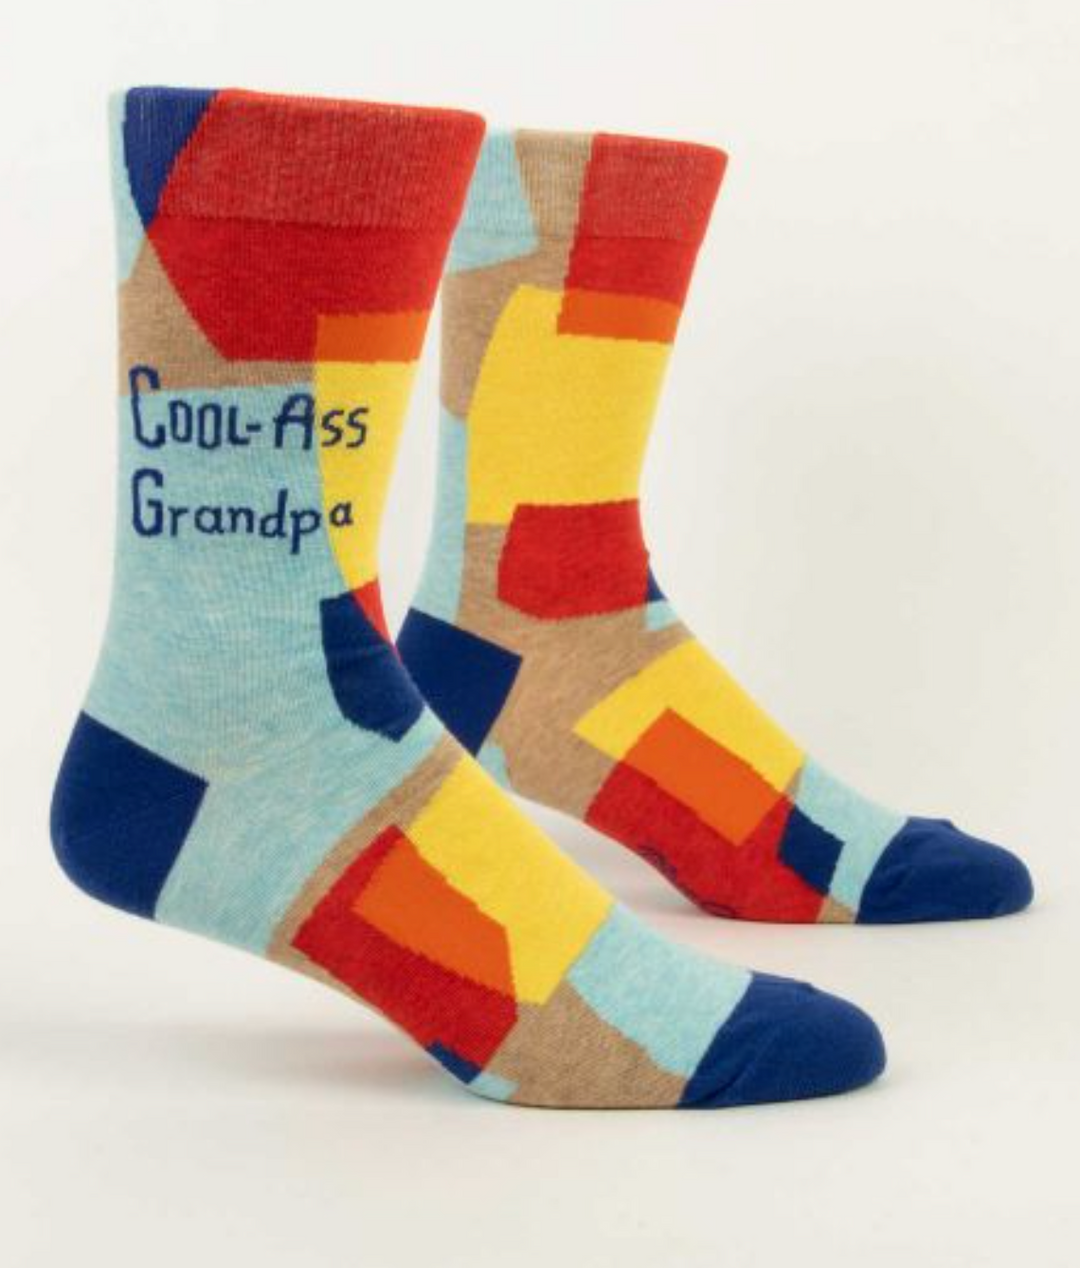 Blue Q Men's Crew Socks, variety of designs to choose from - Pine & Moss